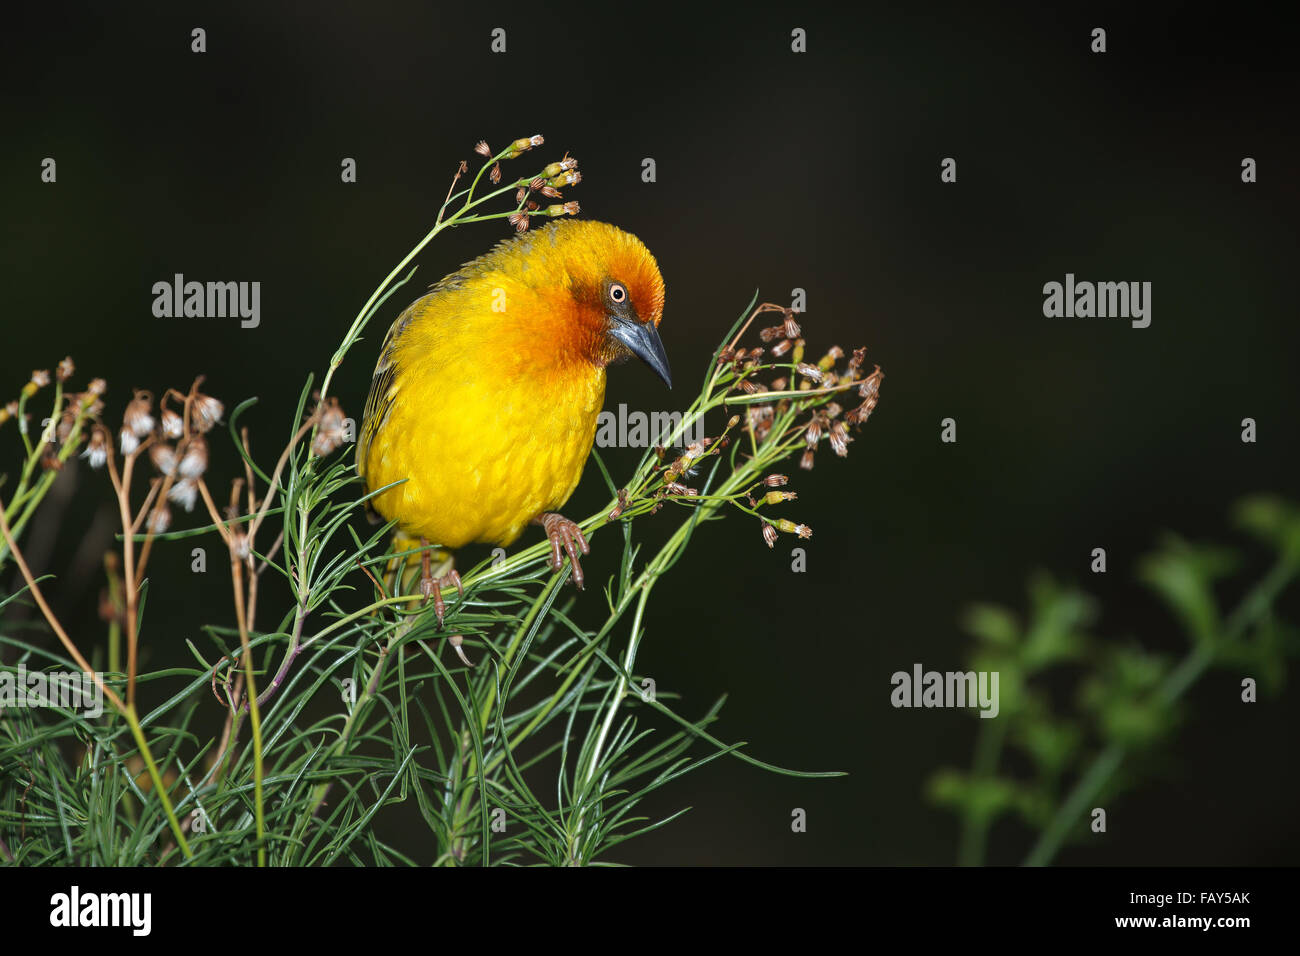 Male Cape weaver (Ploceus capensis) perched on a plant, South Africa Stock Photo